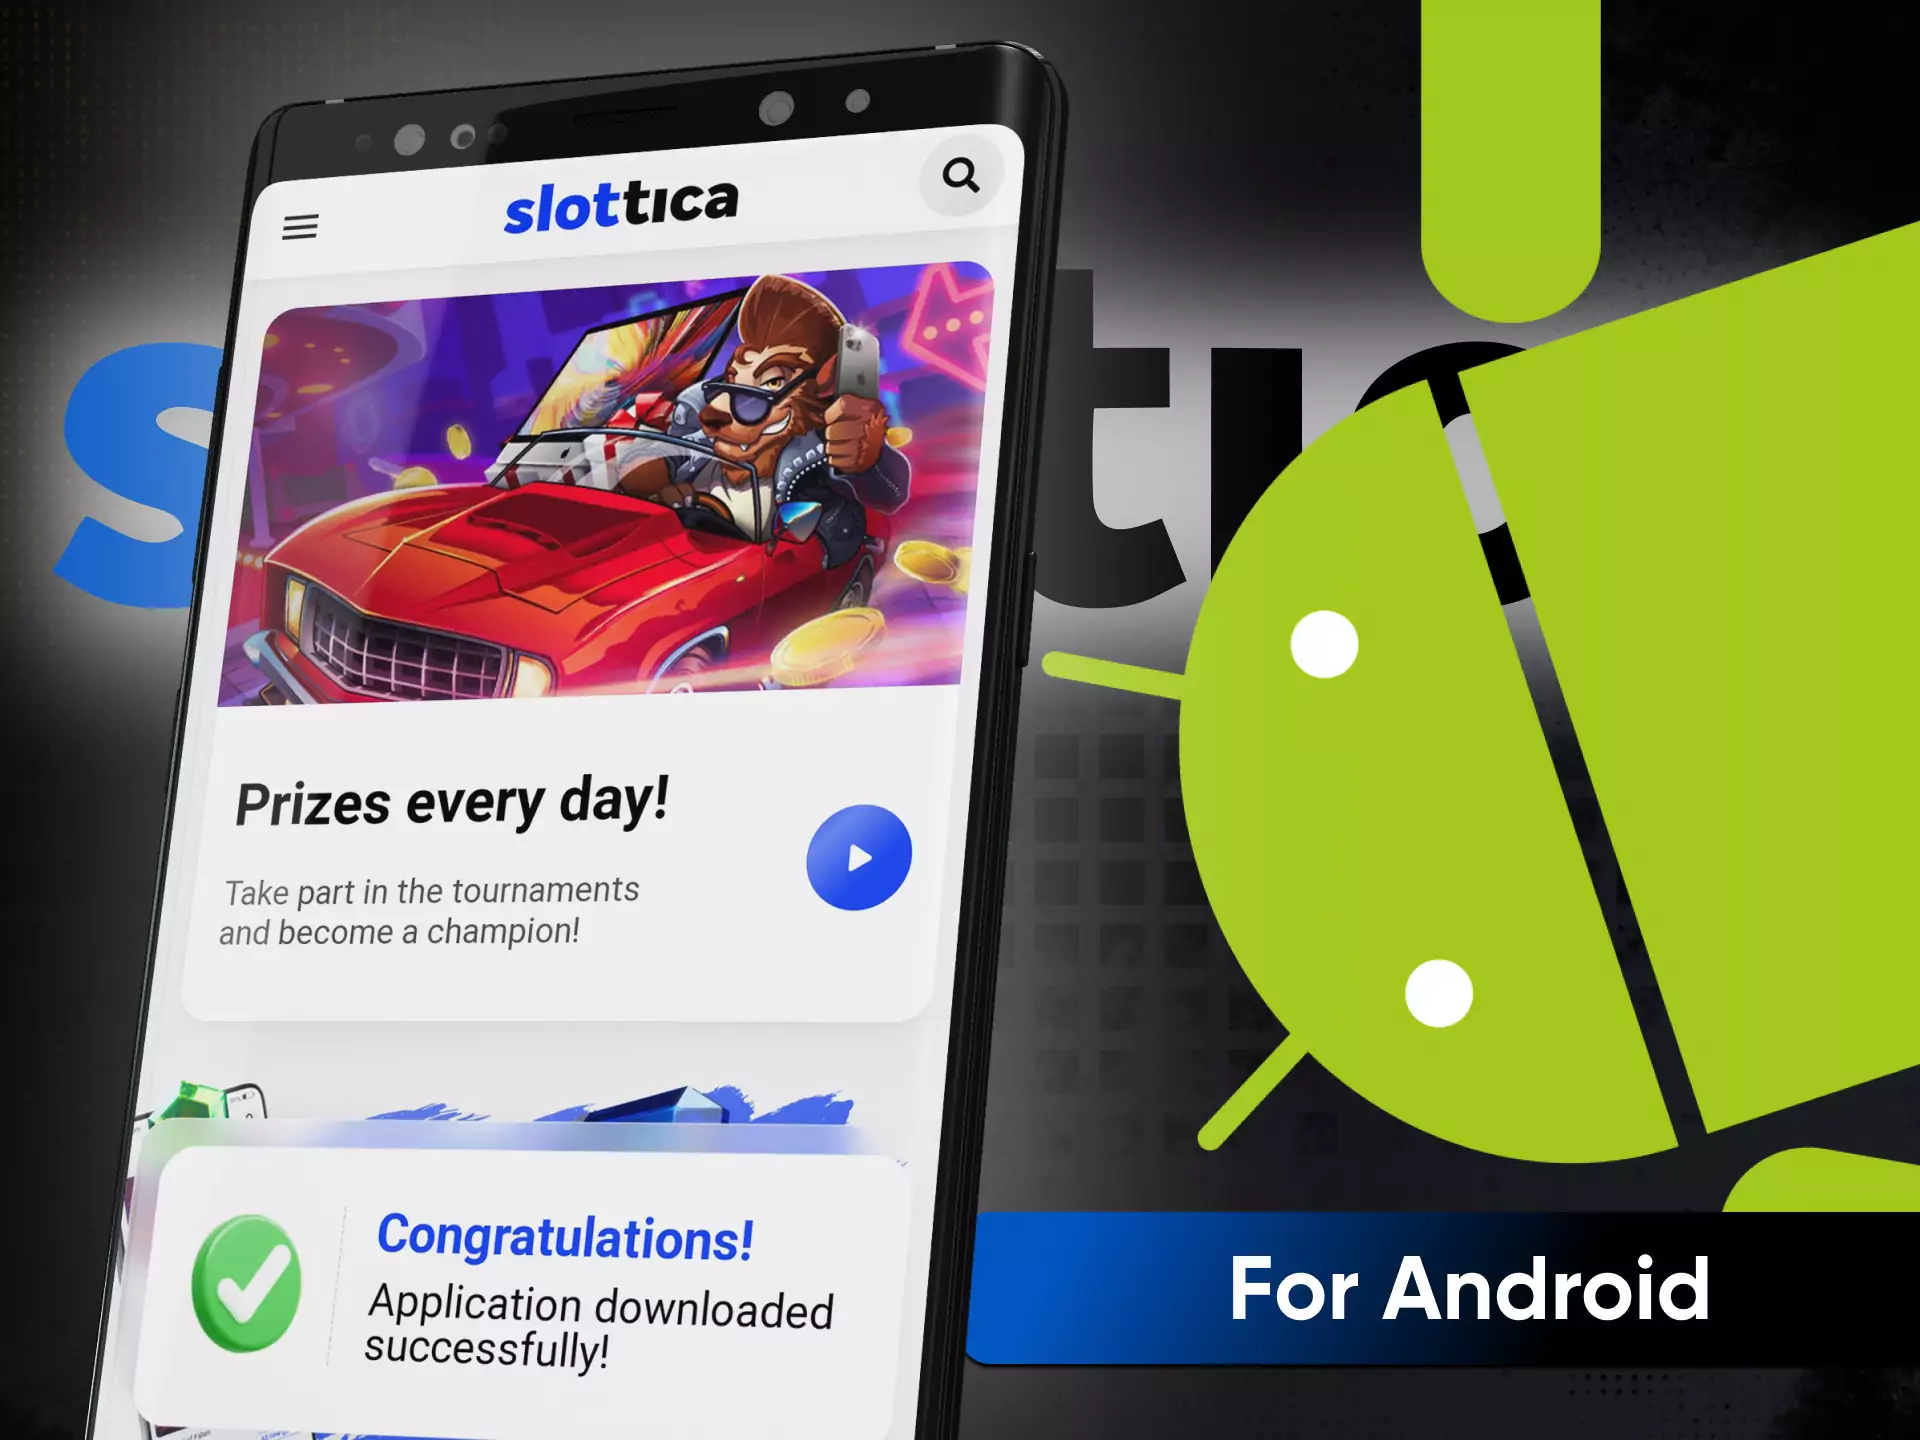 For Android devices, you can download the app of Slottica.